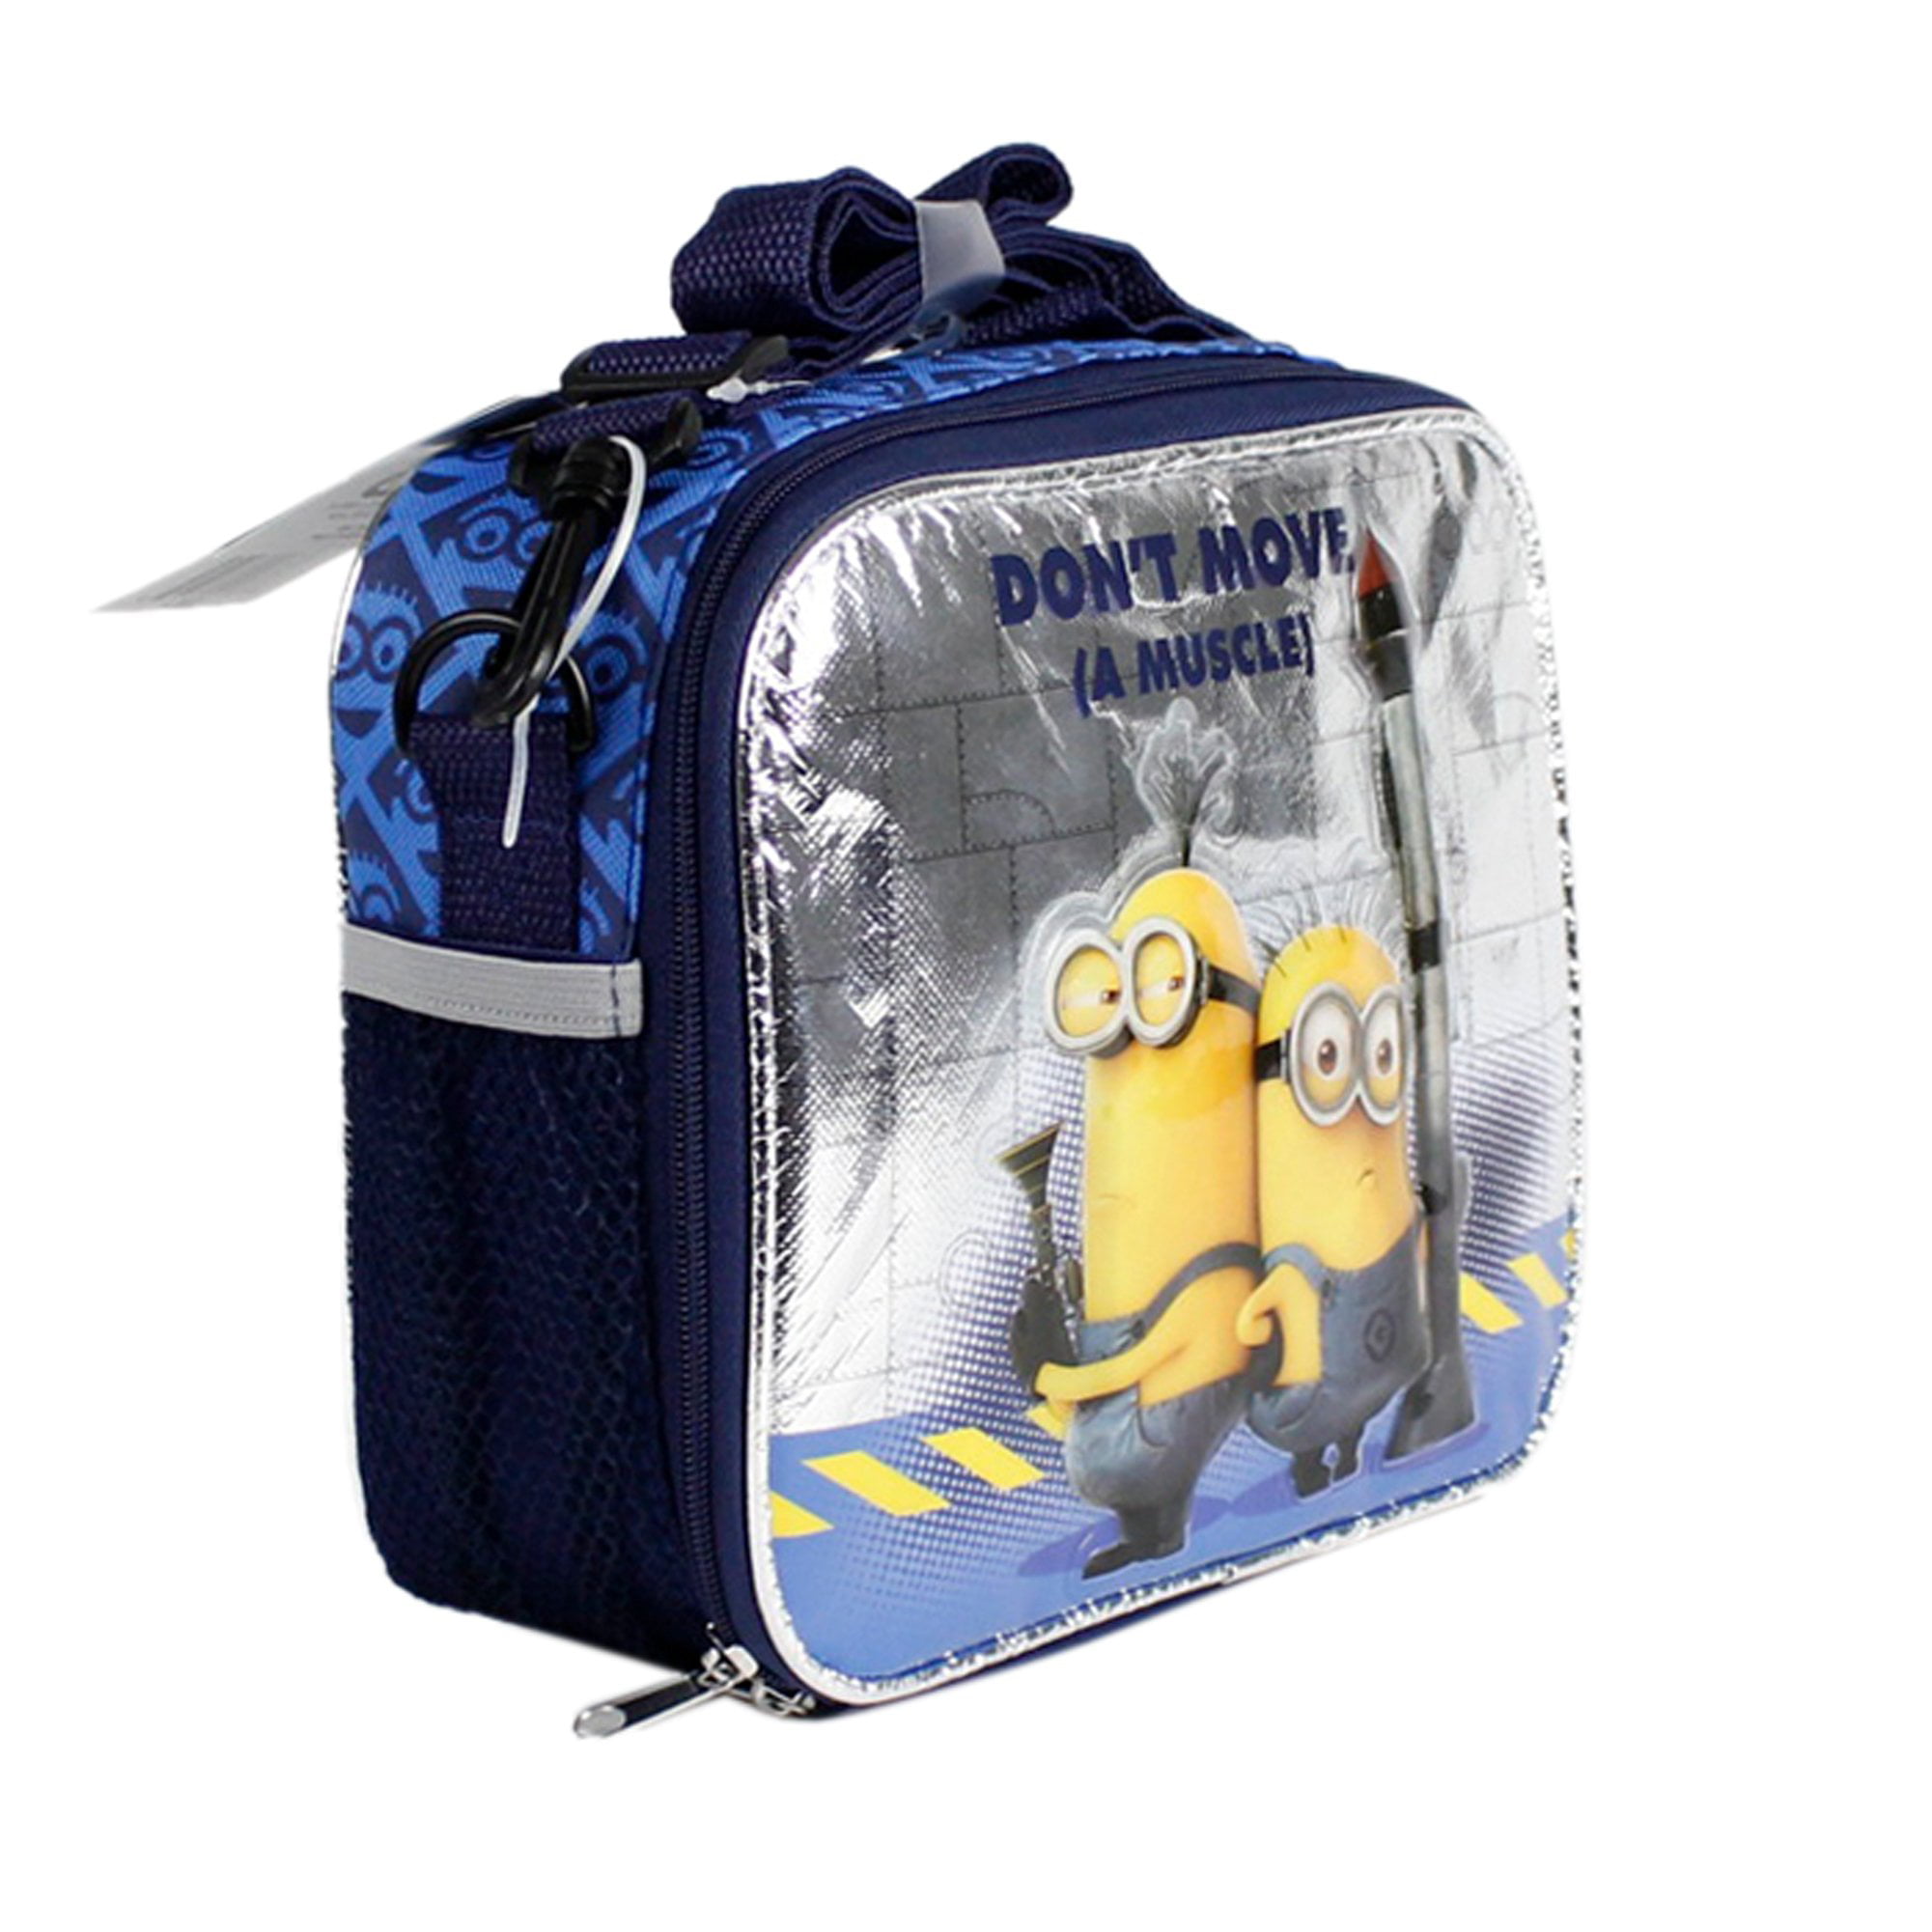 DESPICABLE ME MINIONS TEAM MINION 9.5 INSULATED LUNCHBOX LUNCH BAG-NEW